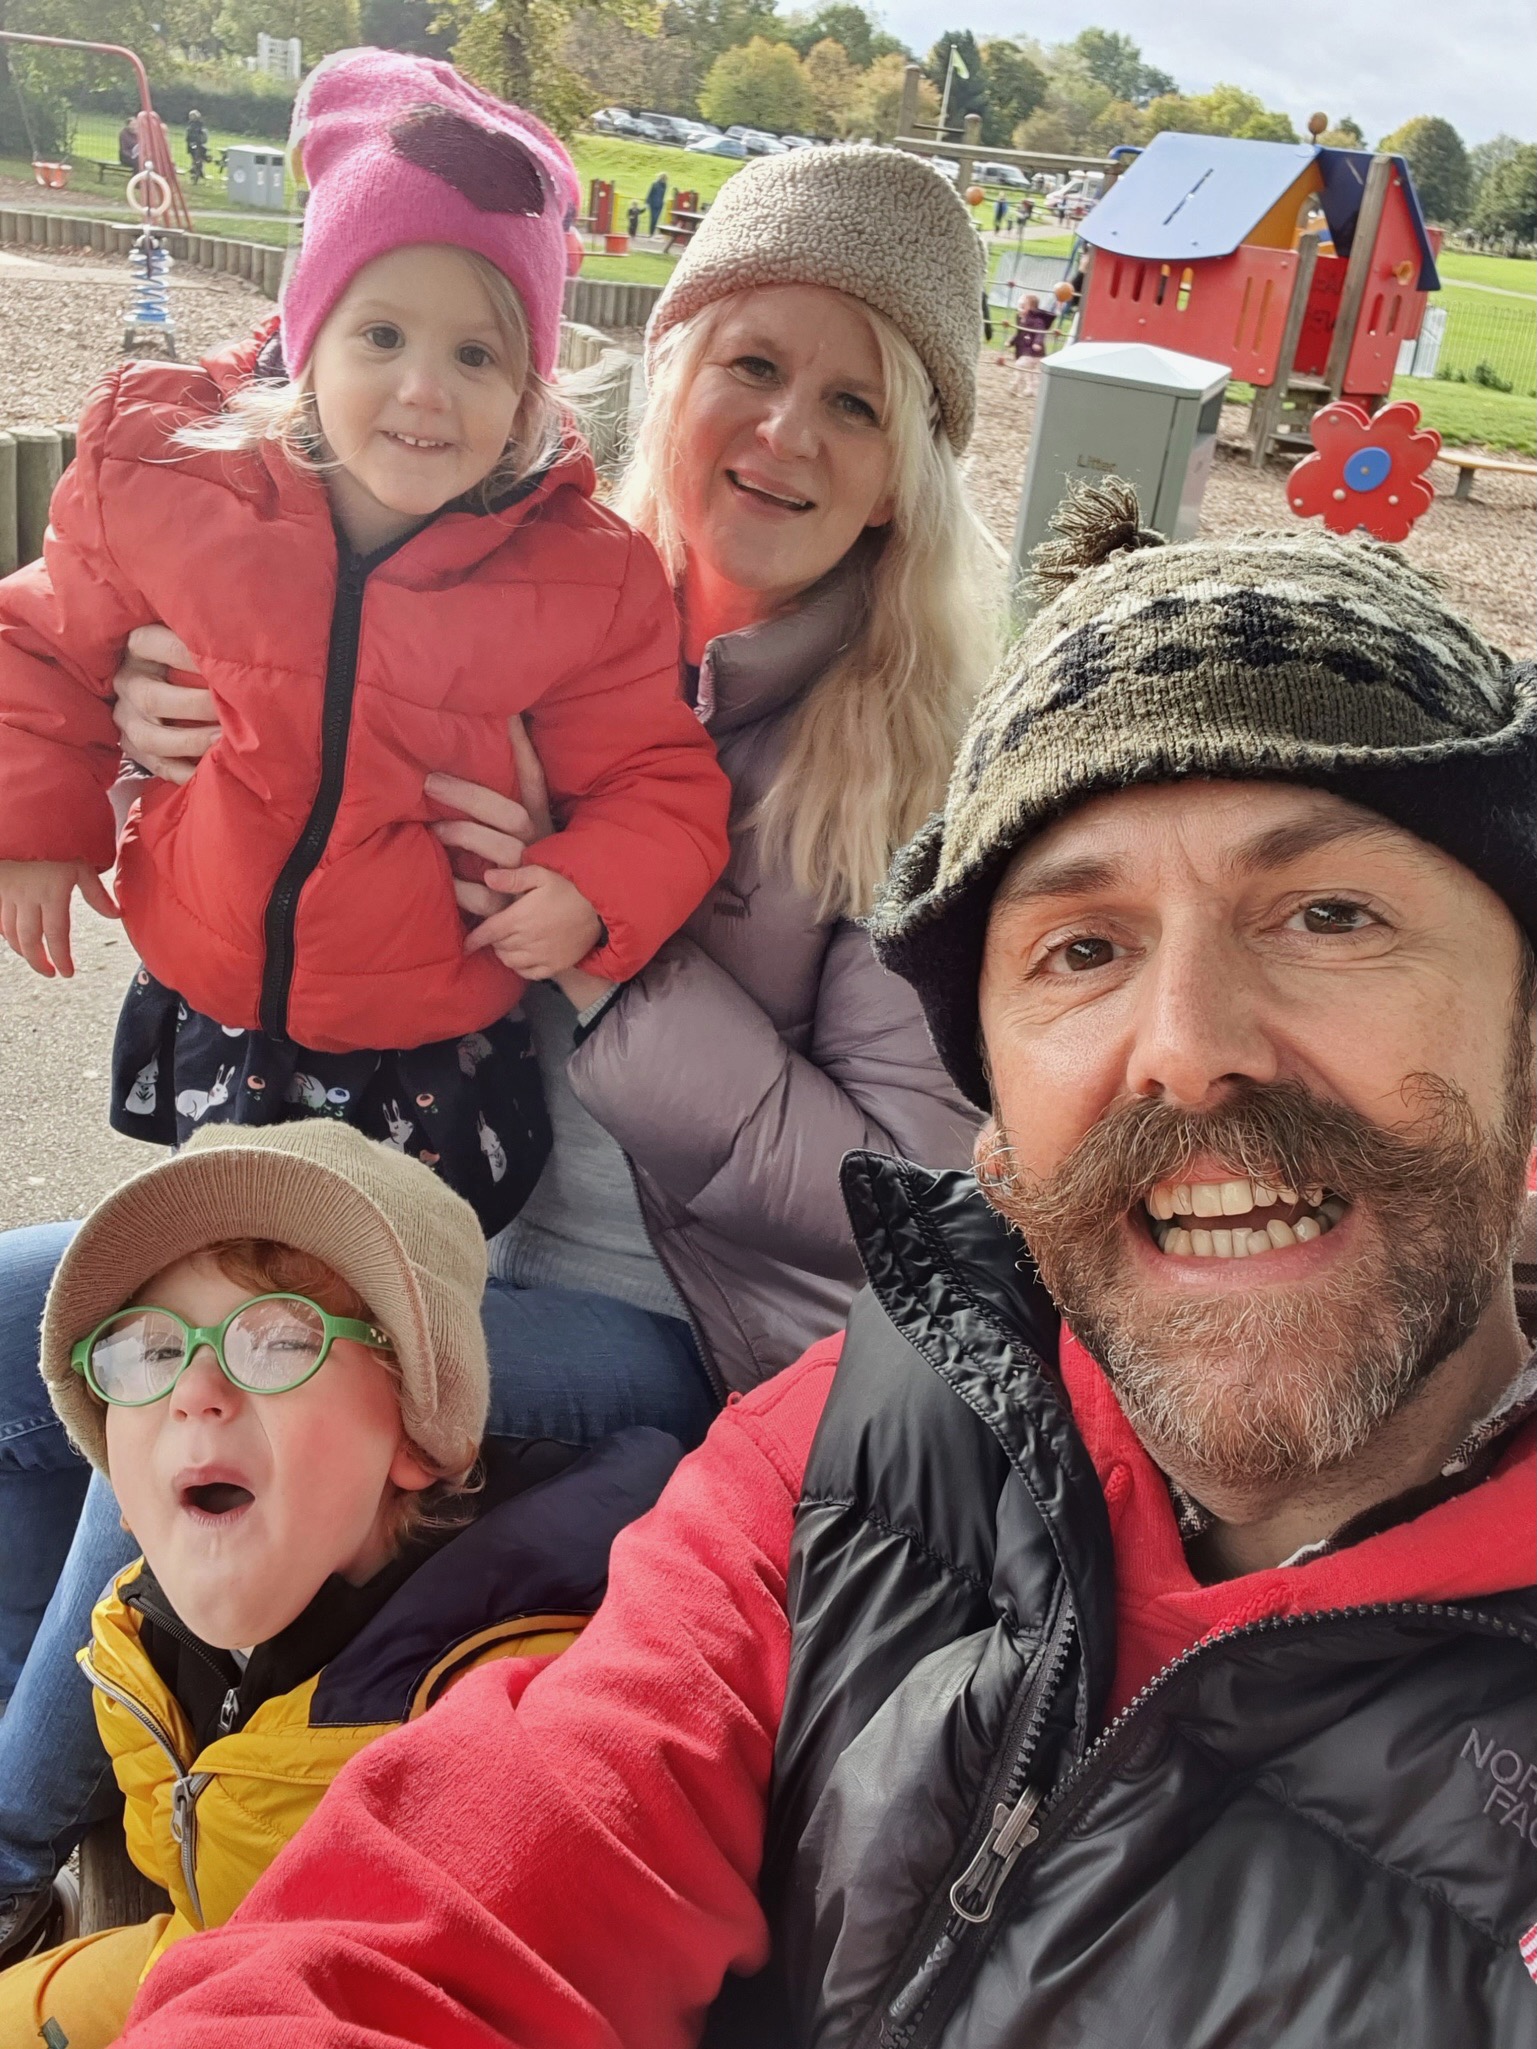 Stephen White, Jo Milne and family. They are all outside, Jo holds on child balanaved on her knee while crouching, Another young boy pulls a funny face wearing blue glasses. Steve takes the photo as a selfie. They all wear big warm coats as if it is a cold day.